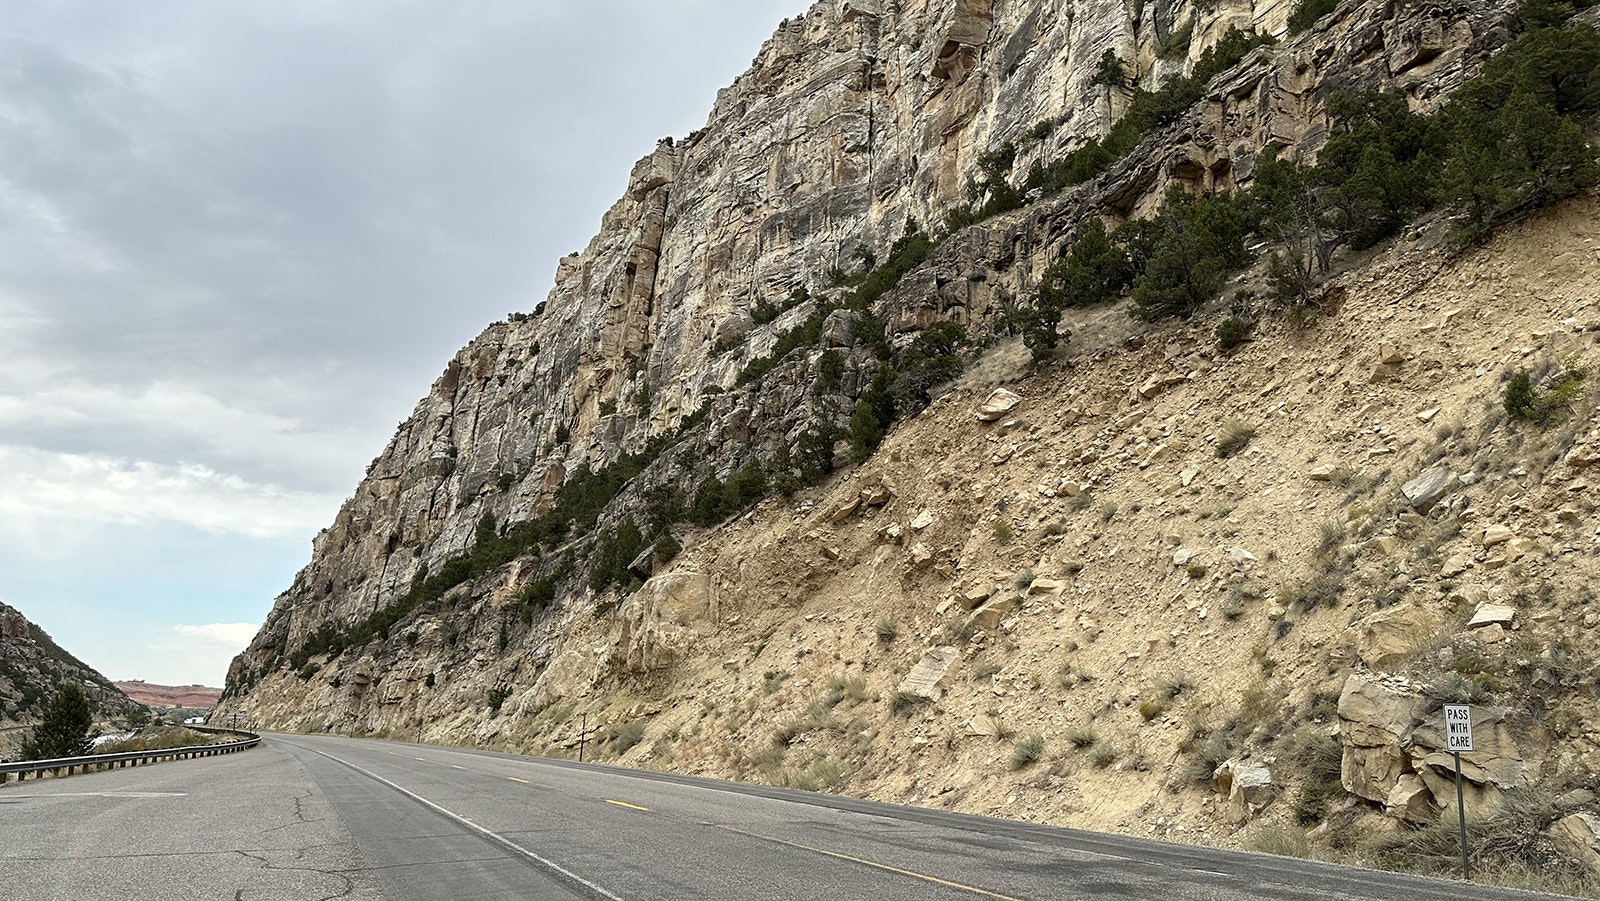 The northern end of the Wind River Canyon, opening up to the Bighorn Basin. A trip through the Wind River Canyon is a chronologically accurate trip through several layers of rock spanning 2.5 billion years.